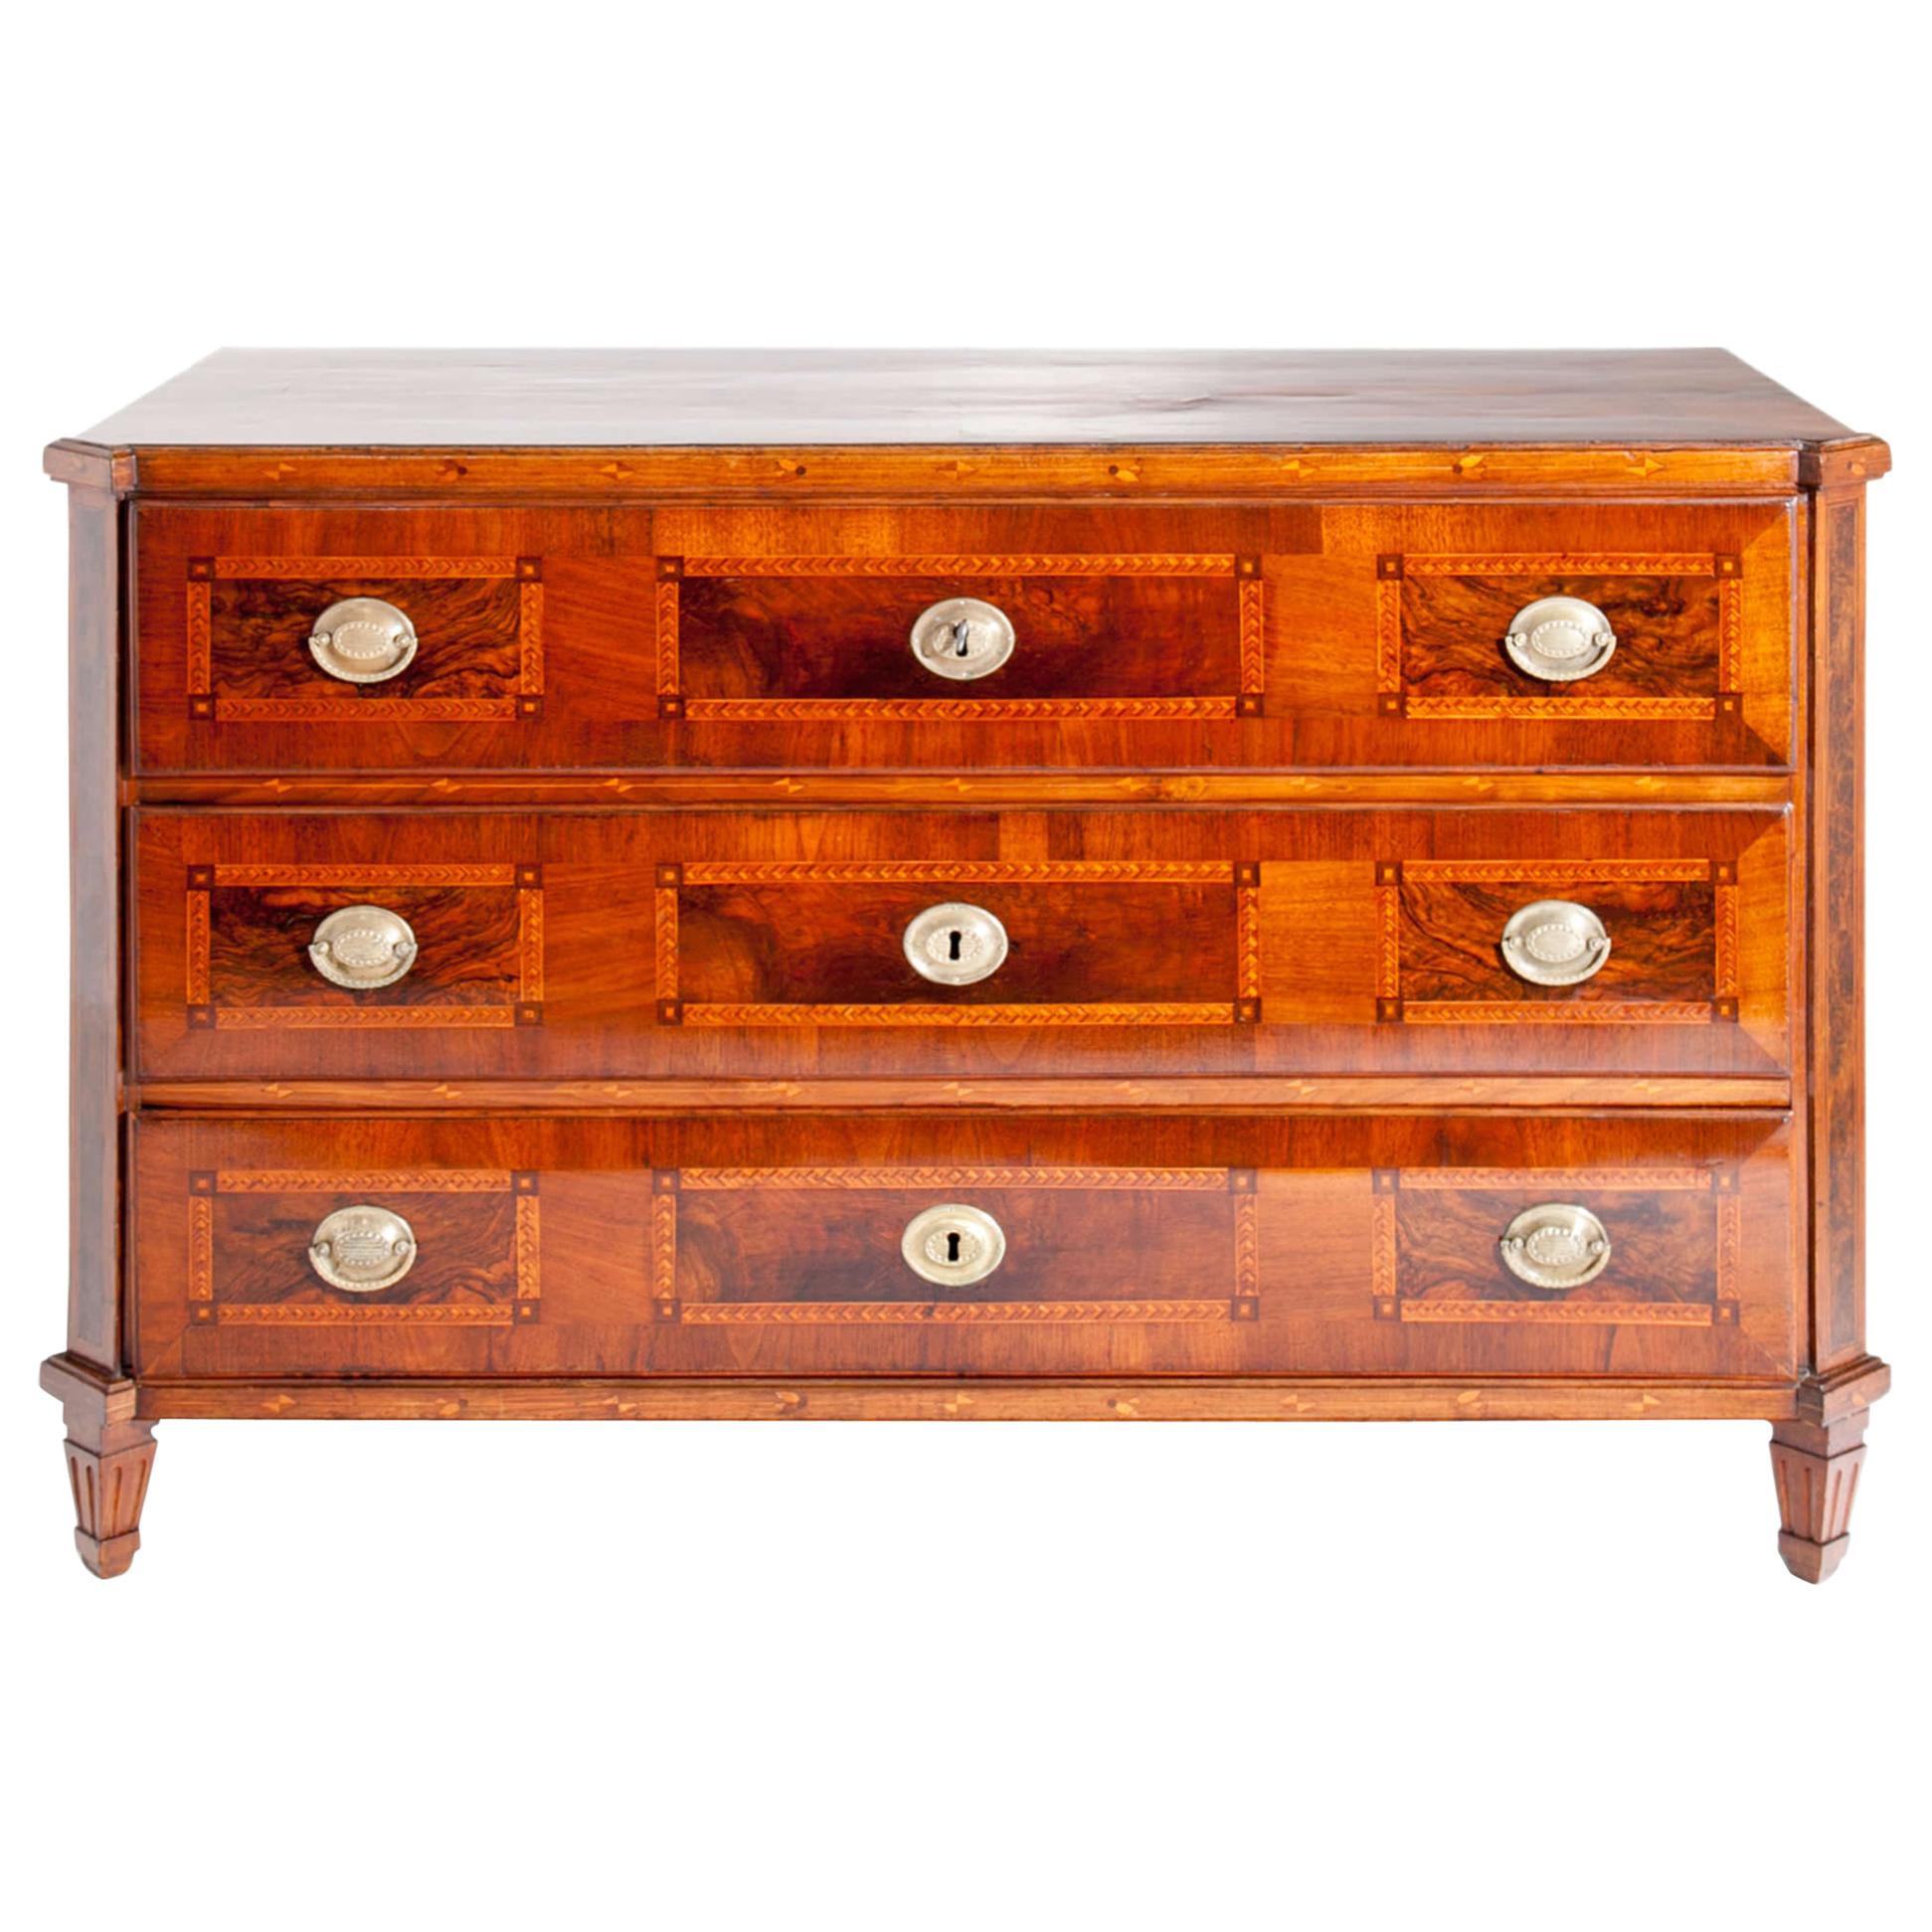 Louis Seize Chest of Drawers, circa 1780